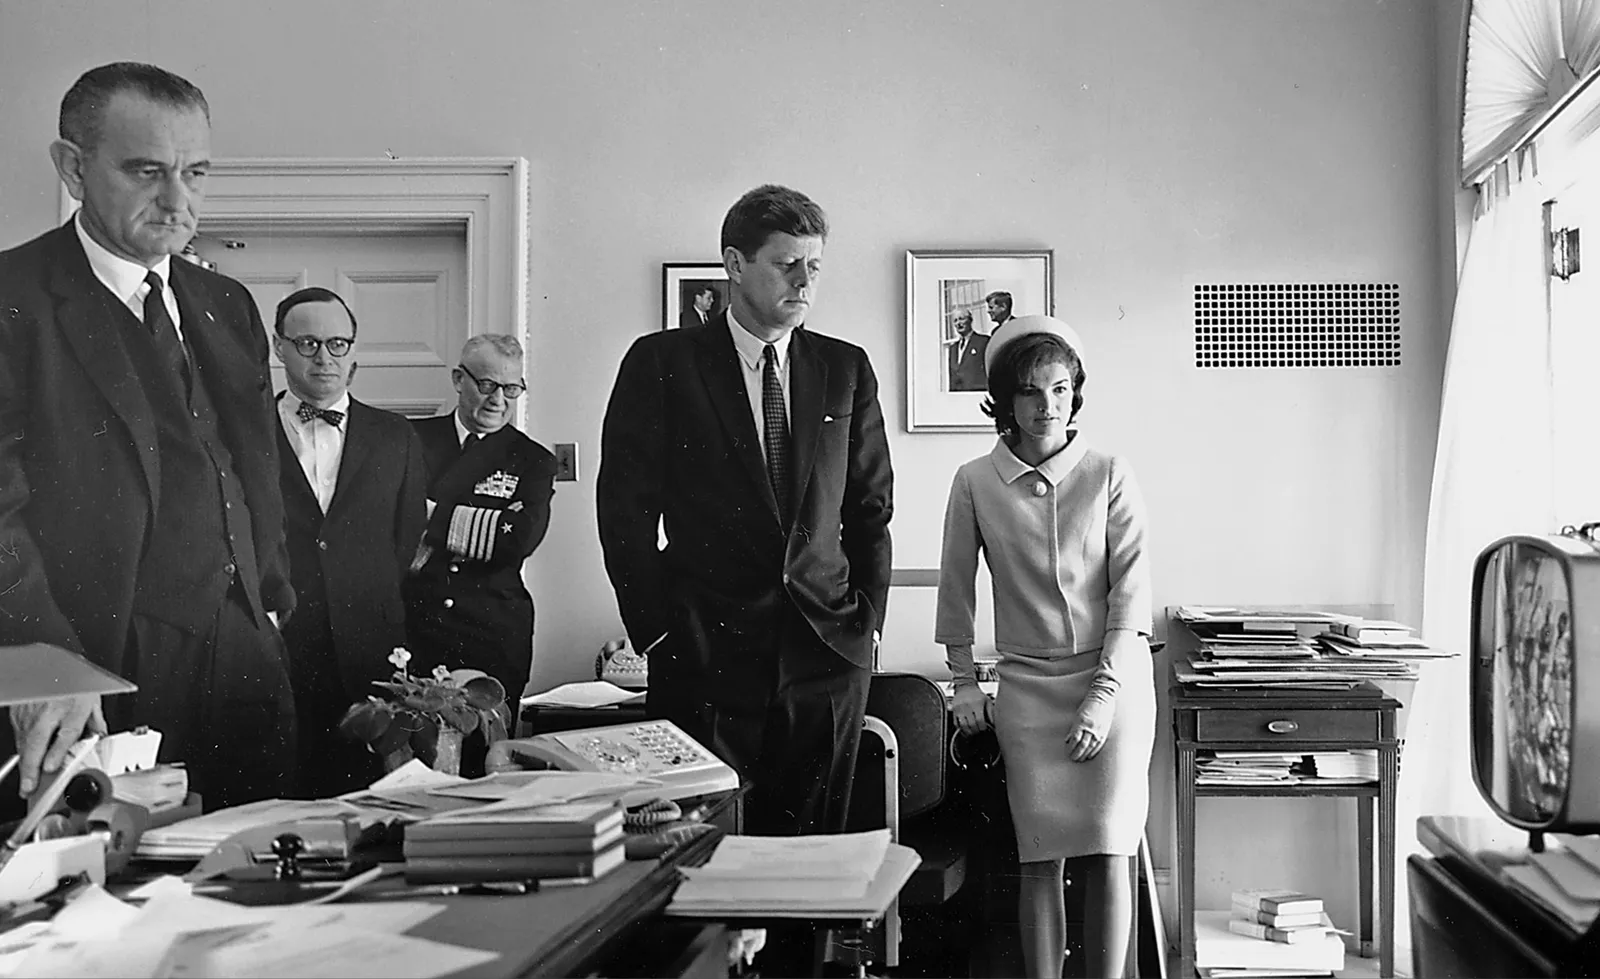 A Year His Presidential Debate, JFK How TV Would Change Politics Smart News| Smithsonian Magazine